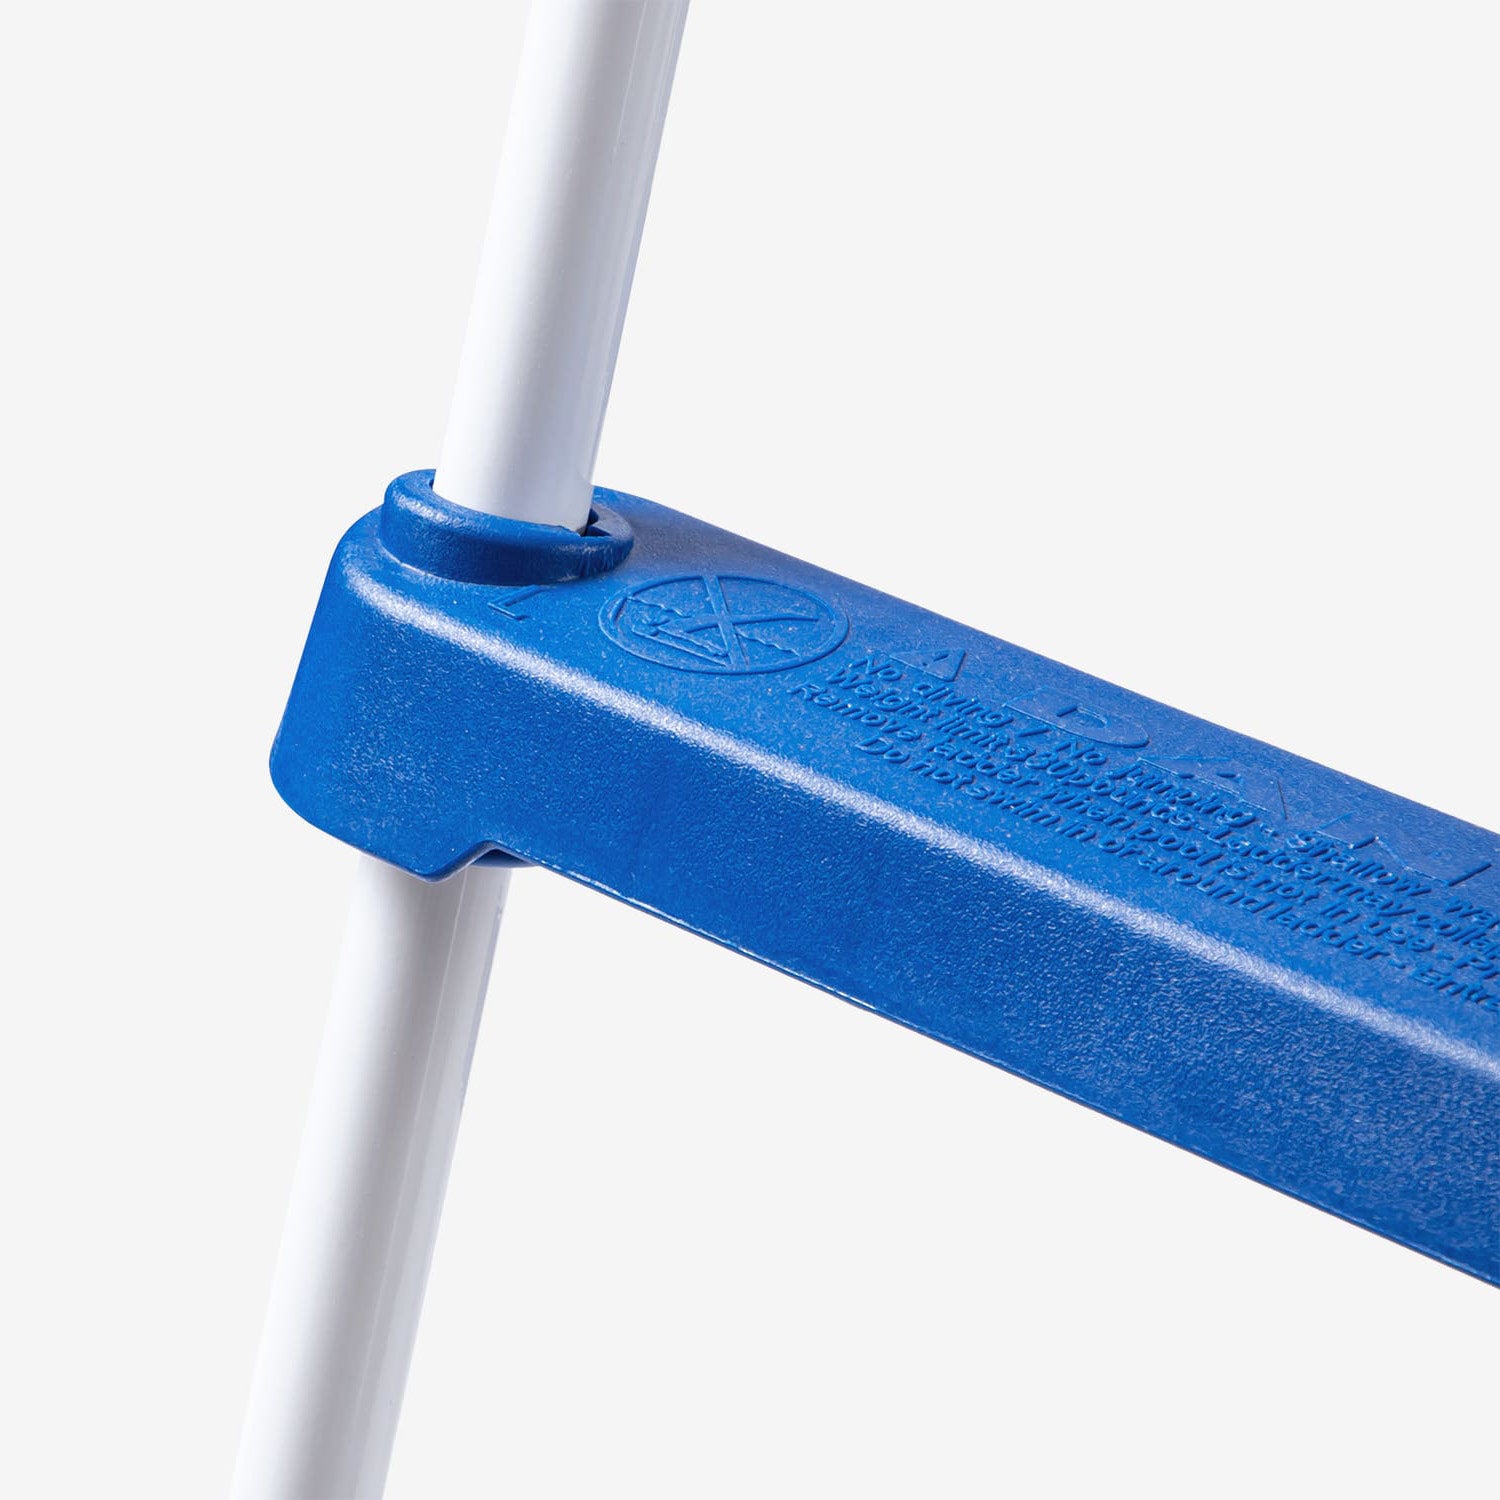 Funsicle 42" SureStep Ladder close up view